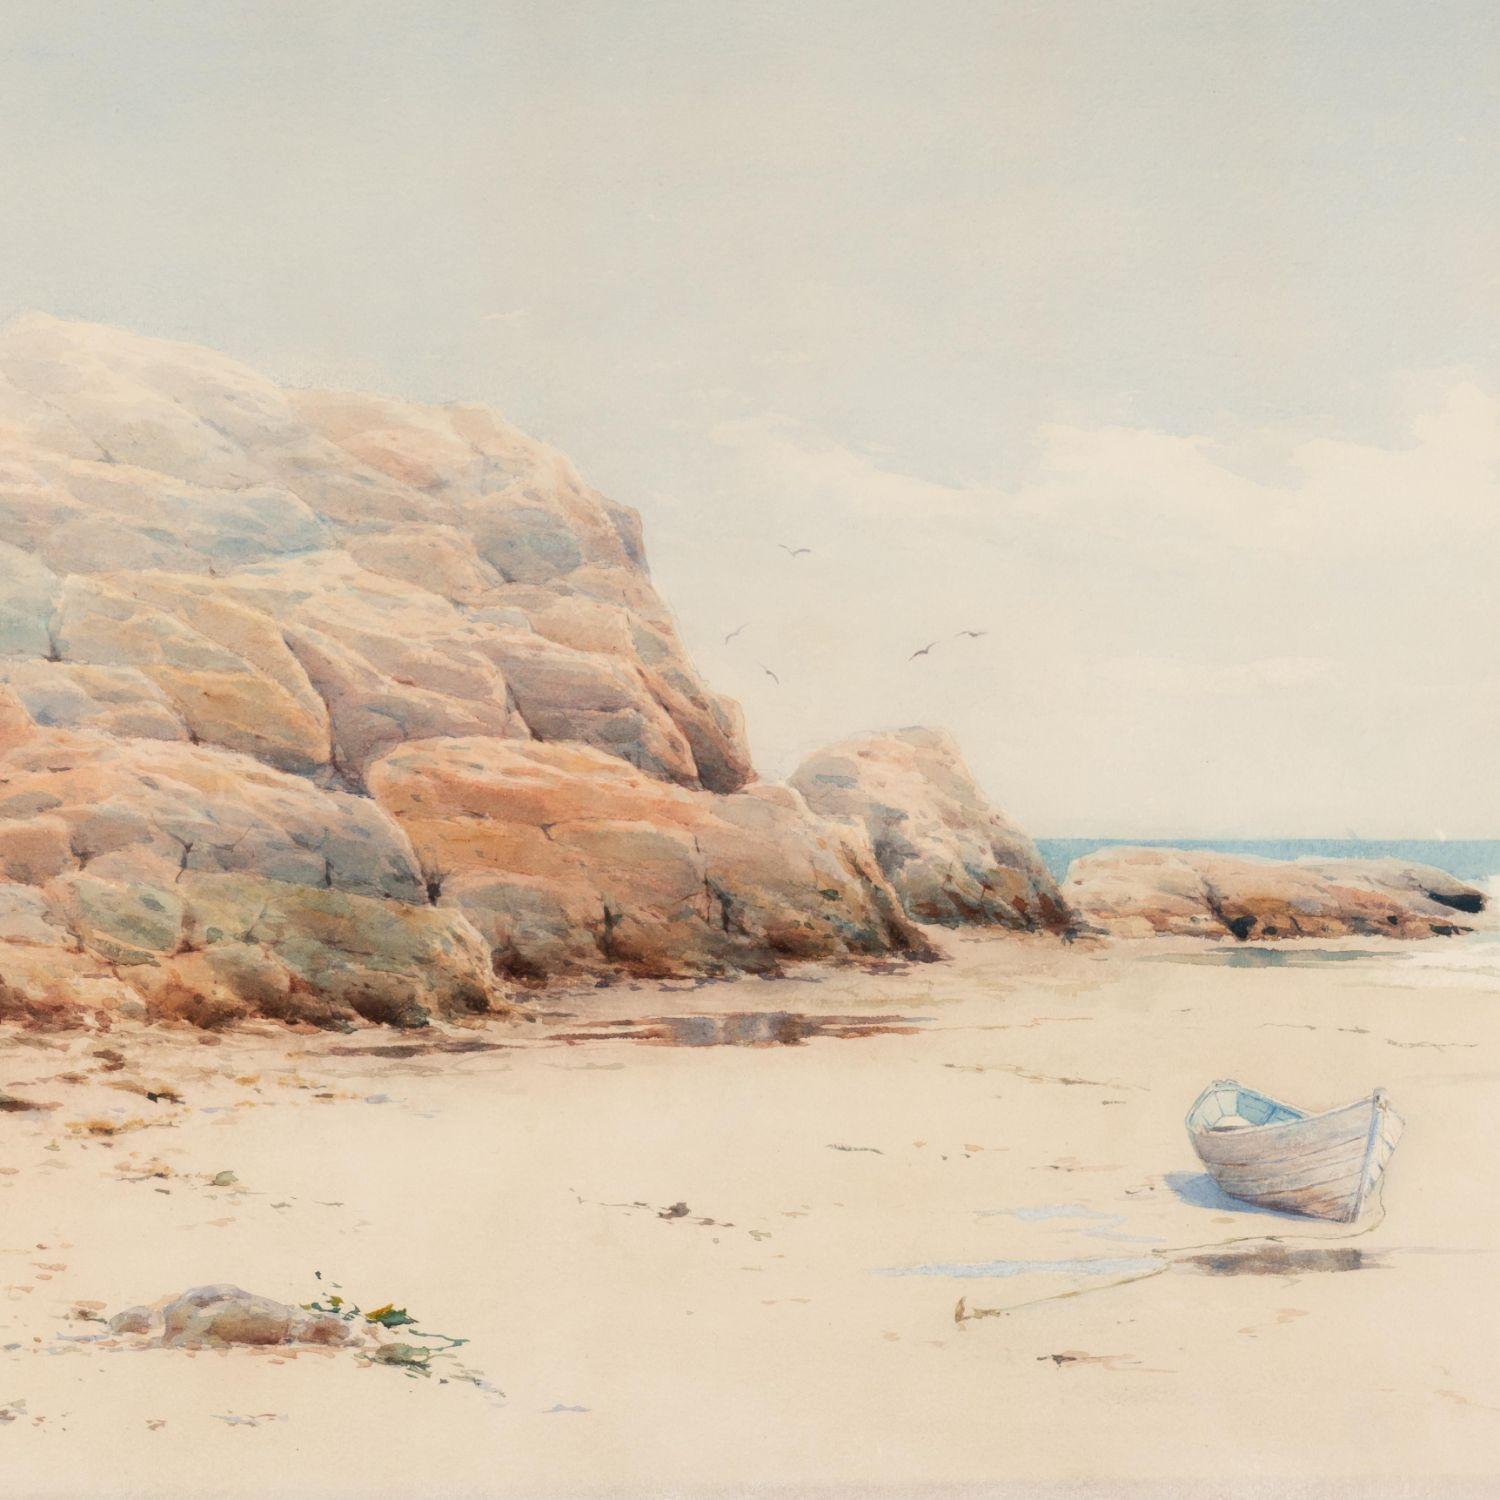 An accomplished shoreline landscape in watercolor on laid paper. The work is presented float mounted on archival mat in a painted molding under UV filtering glass.
American, North Shore Massachusetts, circa 1880.